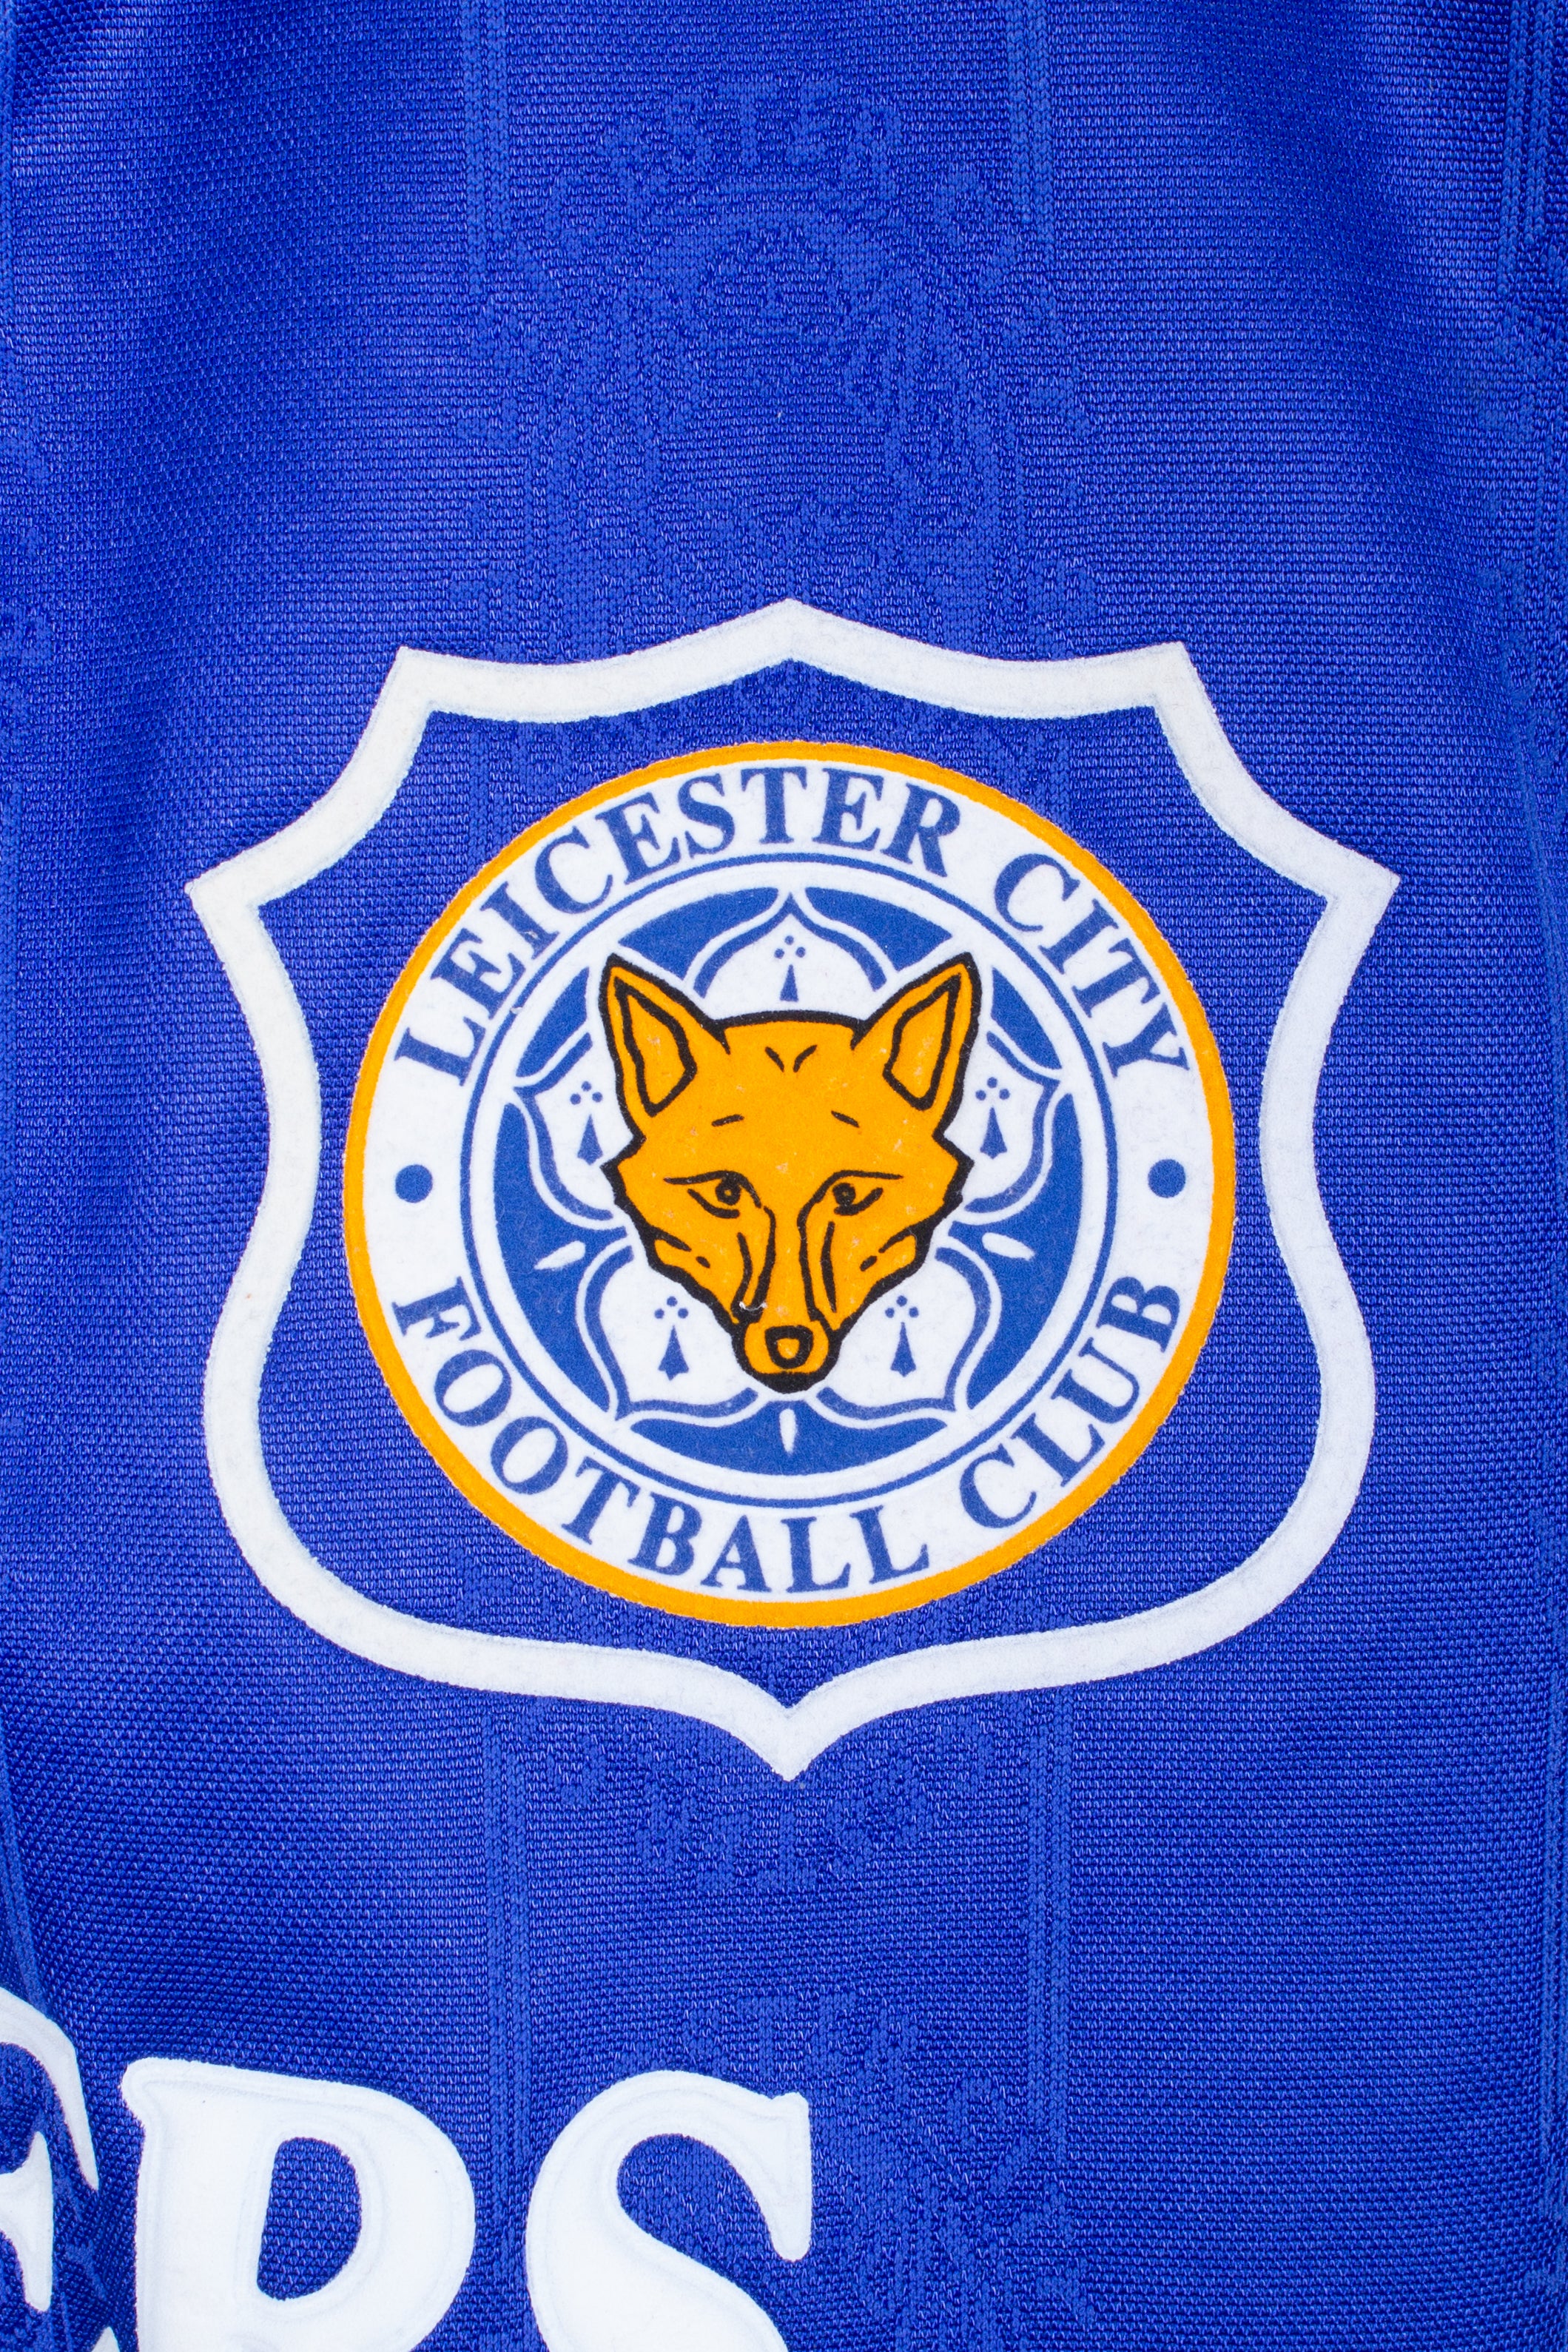 Classic Leicester City Football Shirt, Classic English Football Shirts, Vintage Leicester Shirts